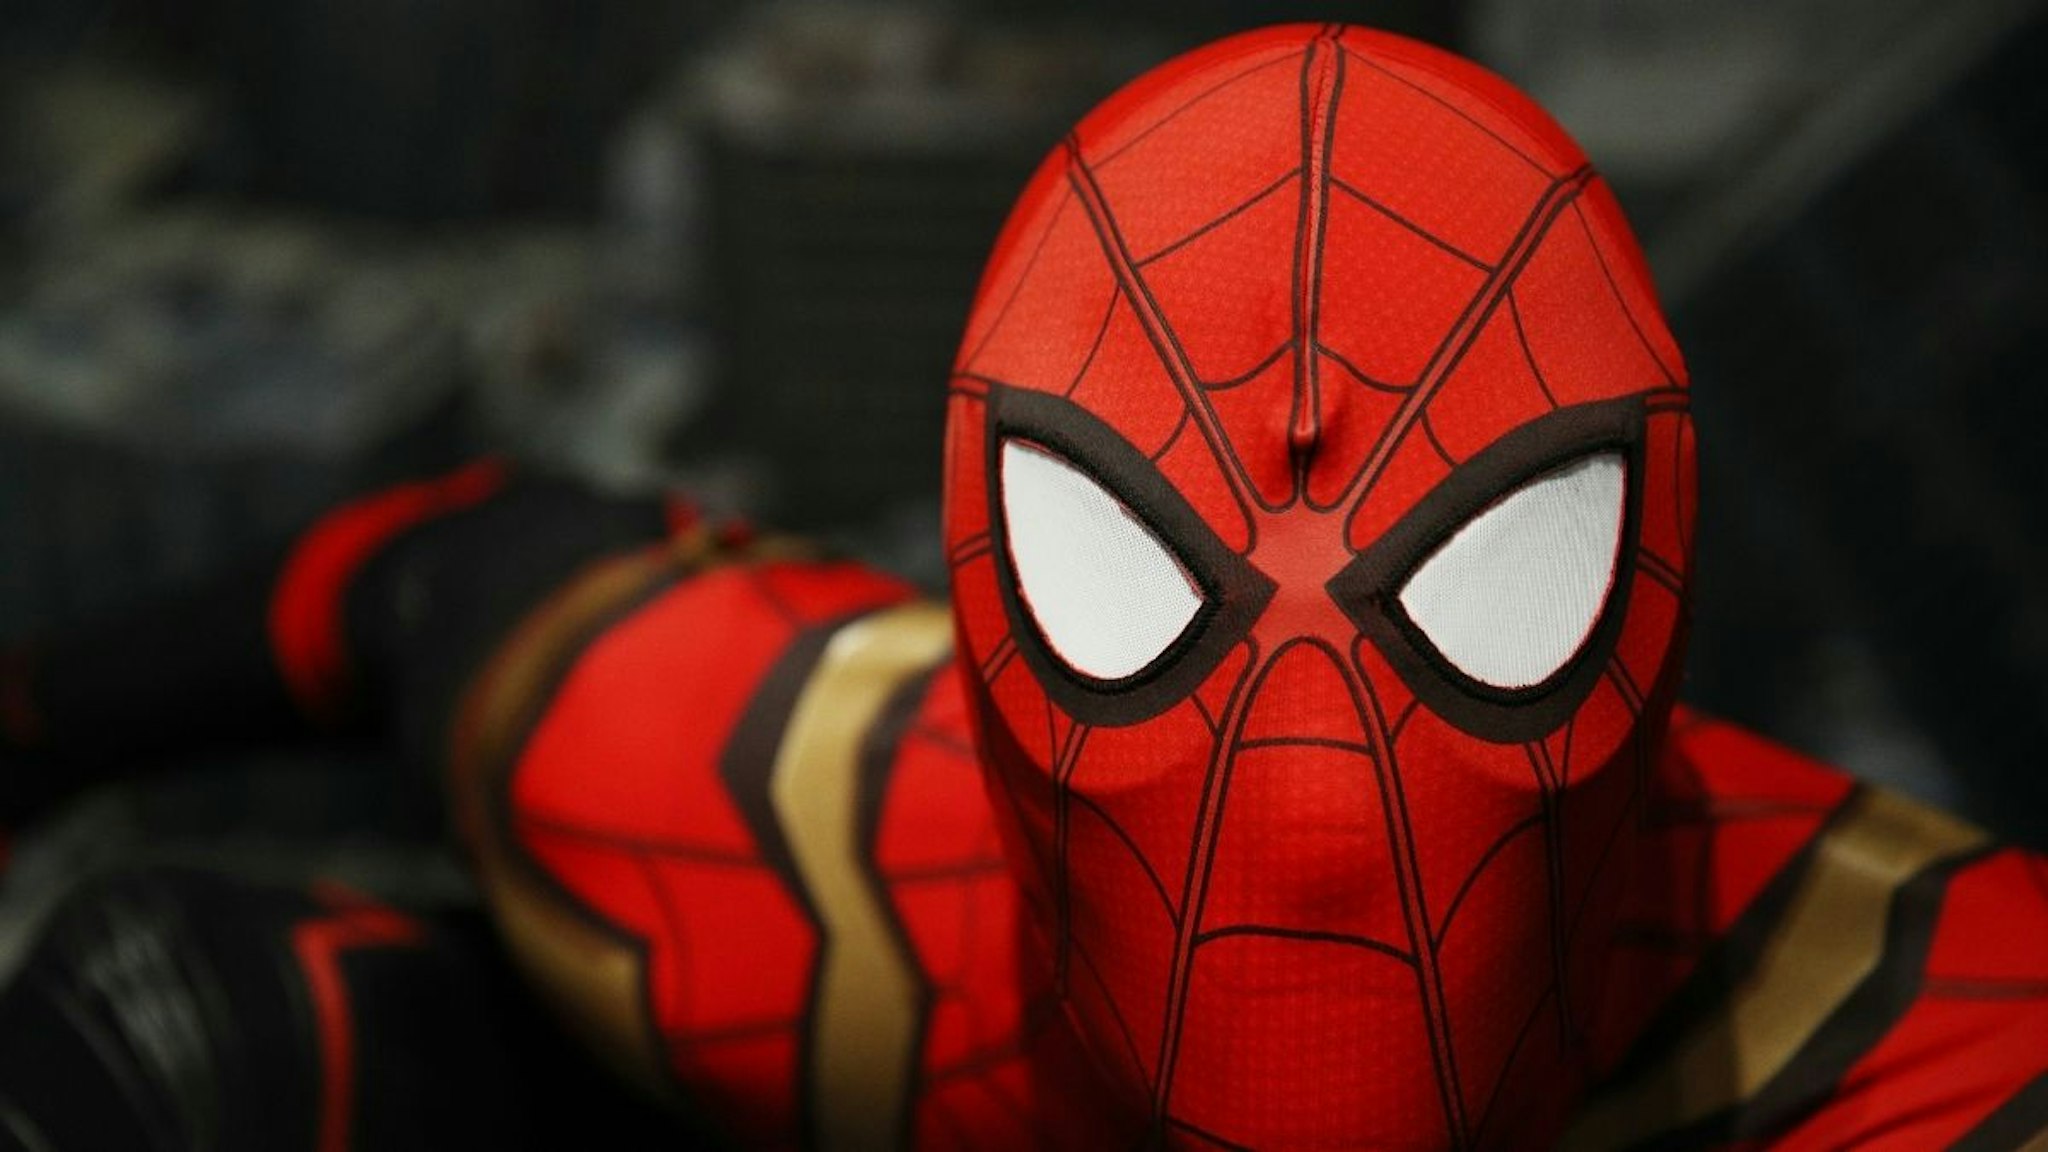 A Spider-Man wax figure is seen in Madame Tussauds in Darling Harbour to celebrate the release of SPIDER-MAN: No Way Home on December 16, 2021 in Sydney, Australia.